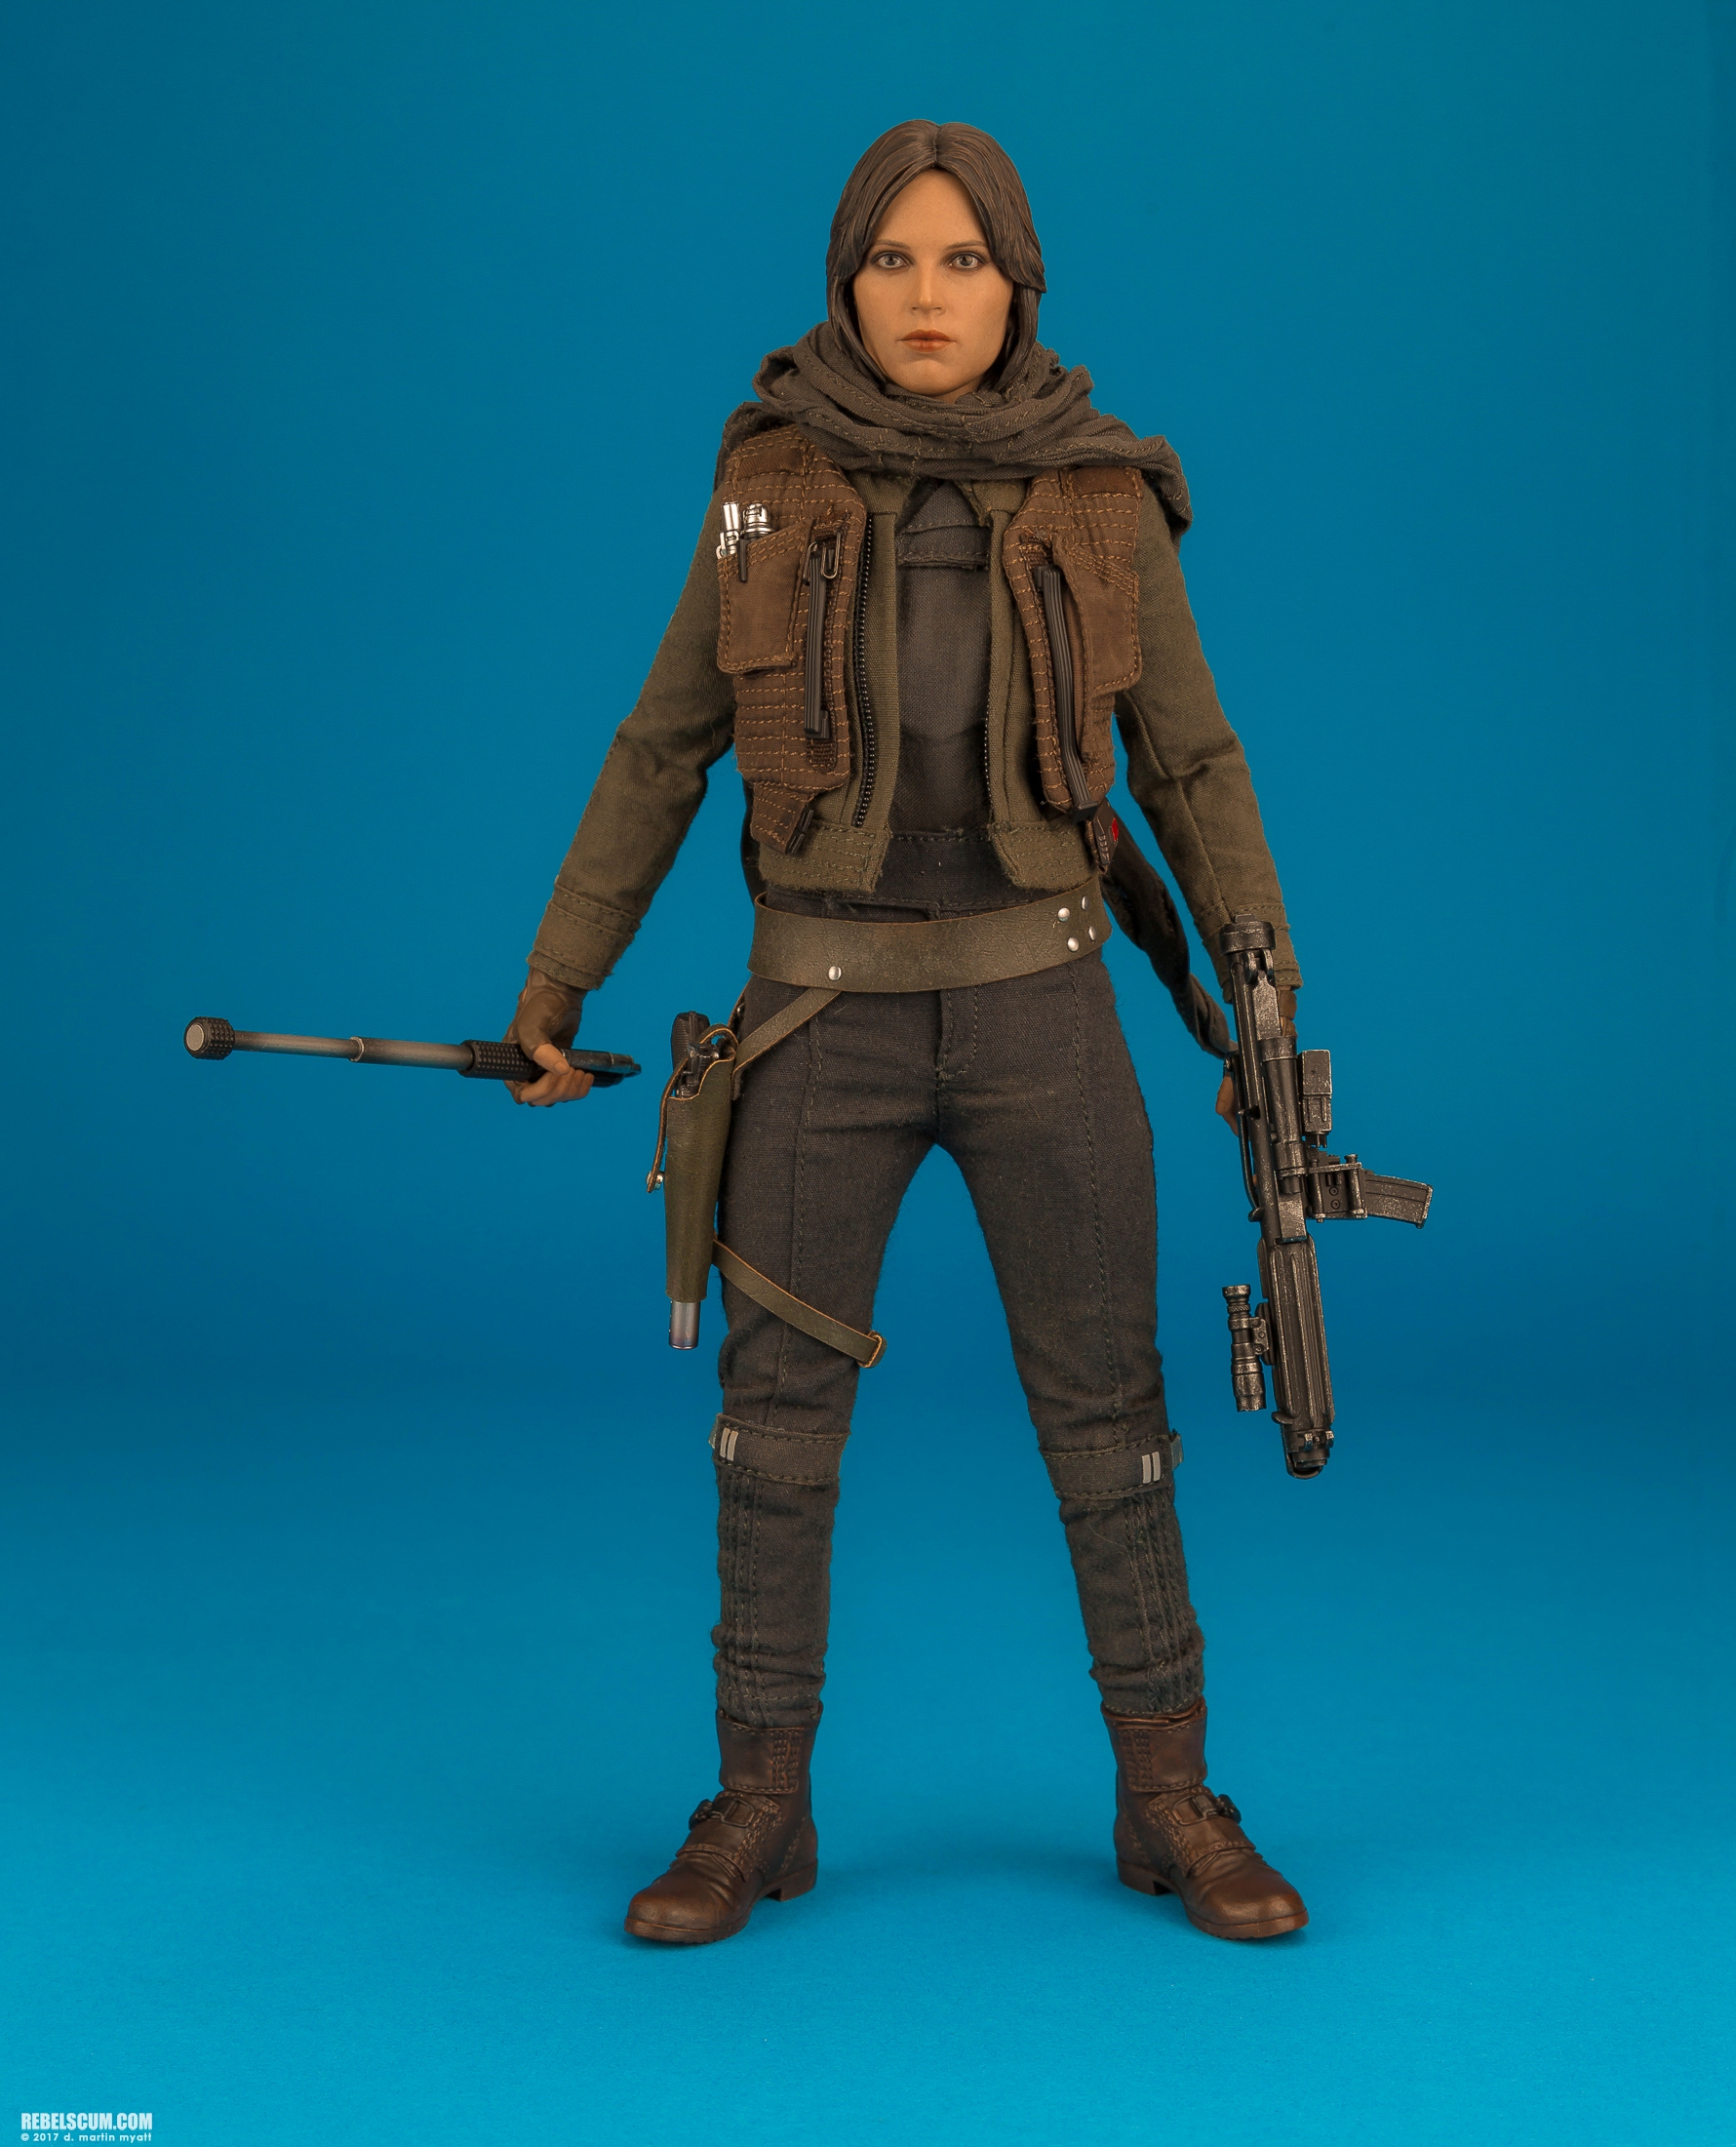 MMS405-Jyn-Erso-Deluxe-Star-Wars-Rogue-One-Hot-Toys-013.jpg